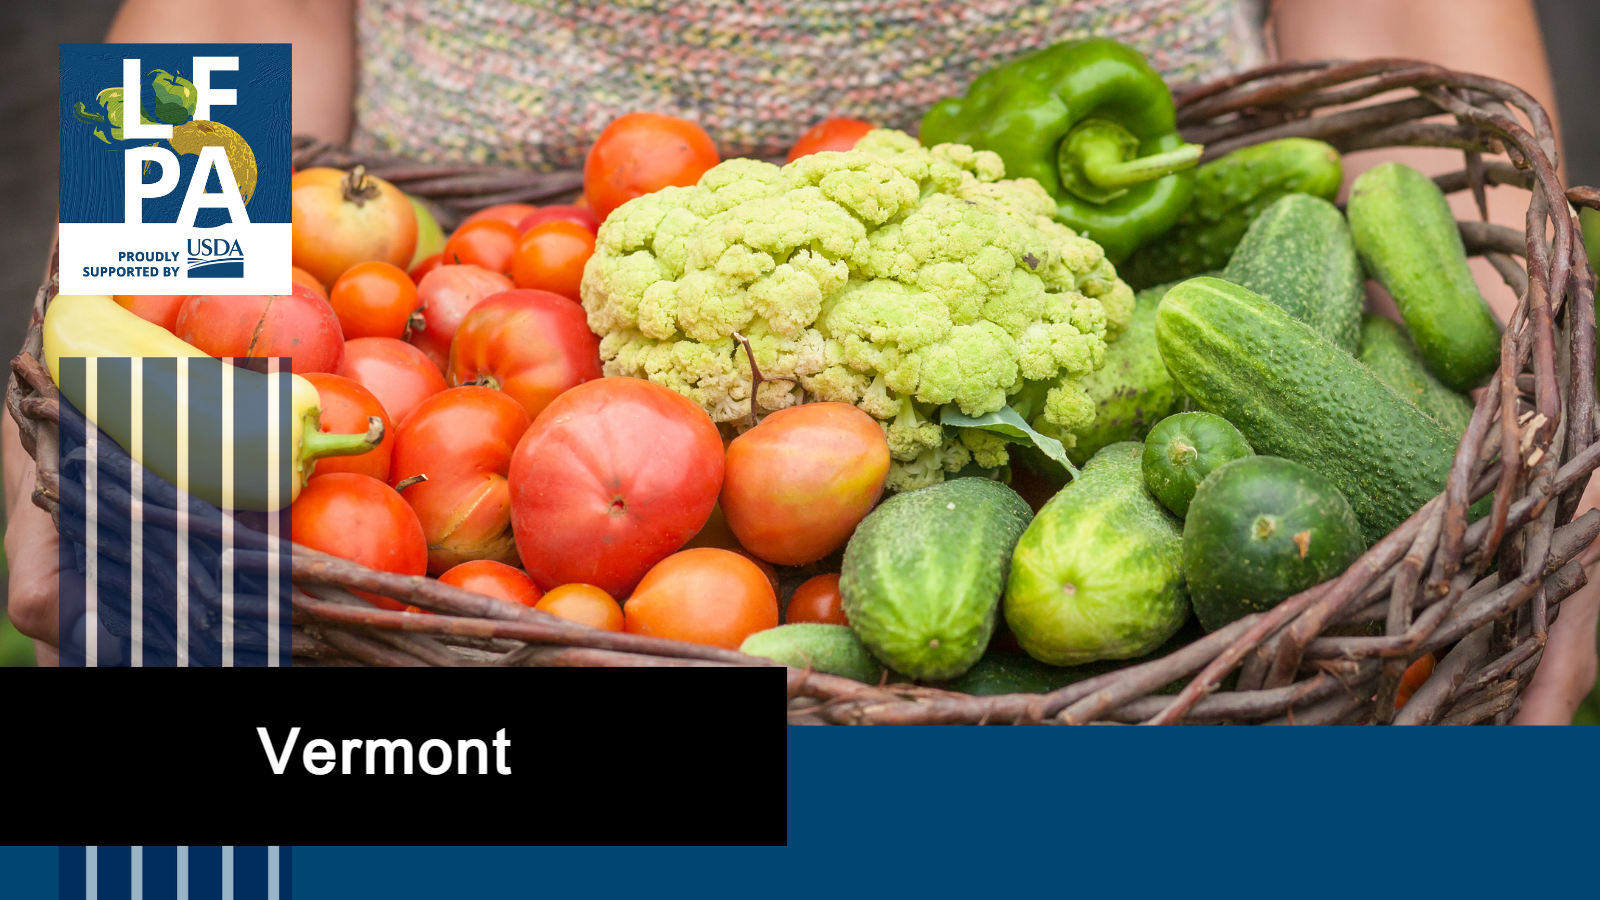 Image of a basket of fresh fruits and vegetables with the USDA Local Food Purchase Assistance logo and text reading "Vermont."